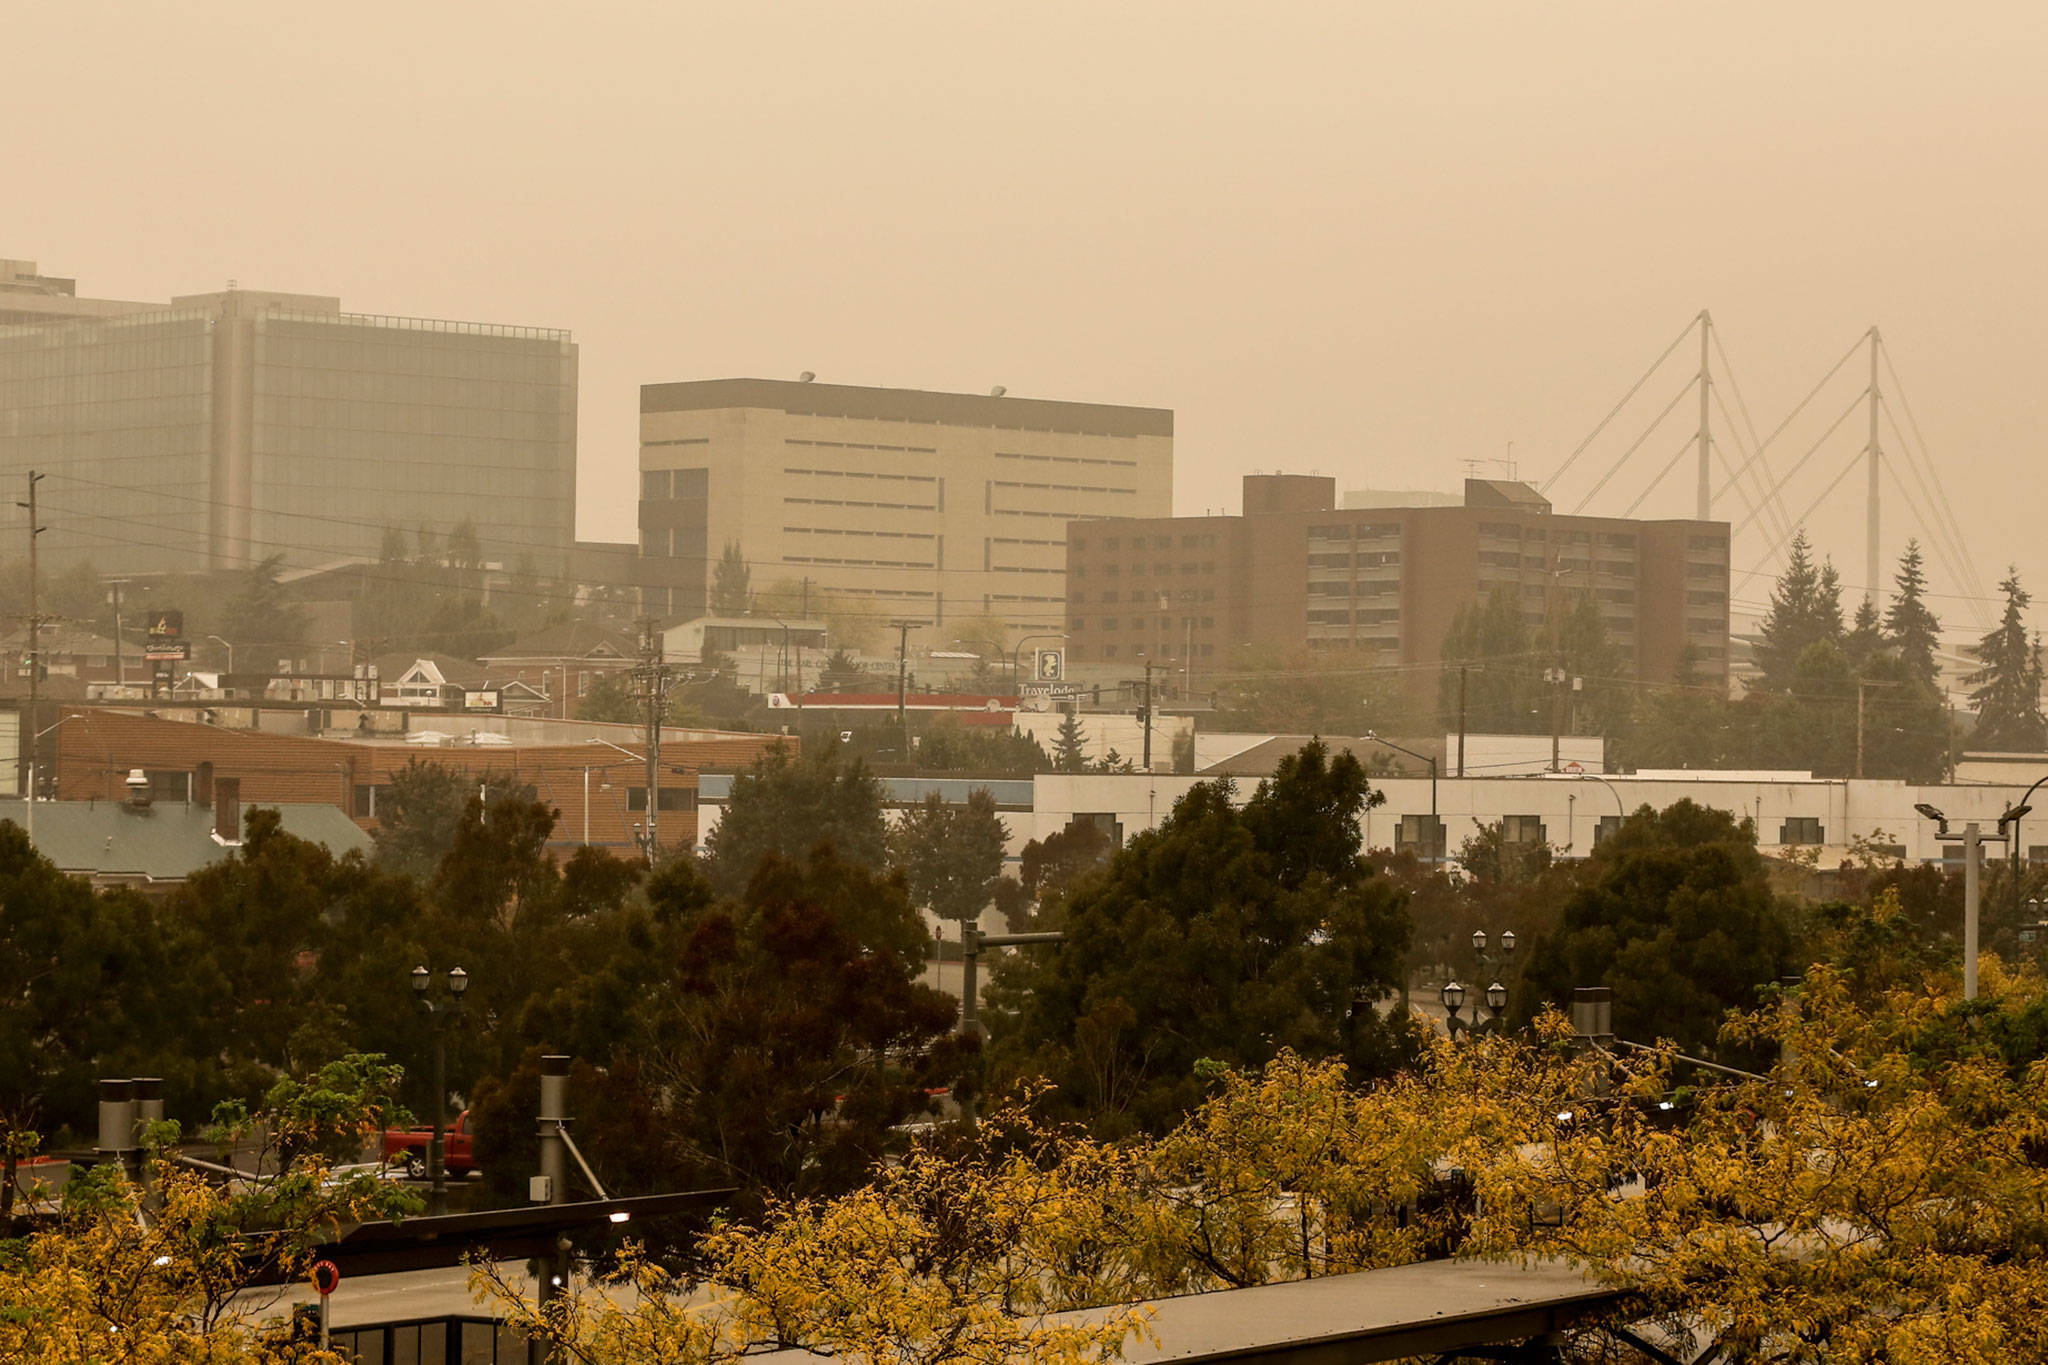 Downtown Everett was doused in smoke from West Coast wildfires on Saturday. (Kevin Clark / The Herald)